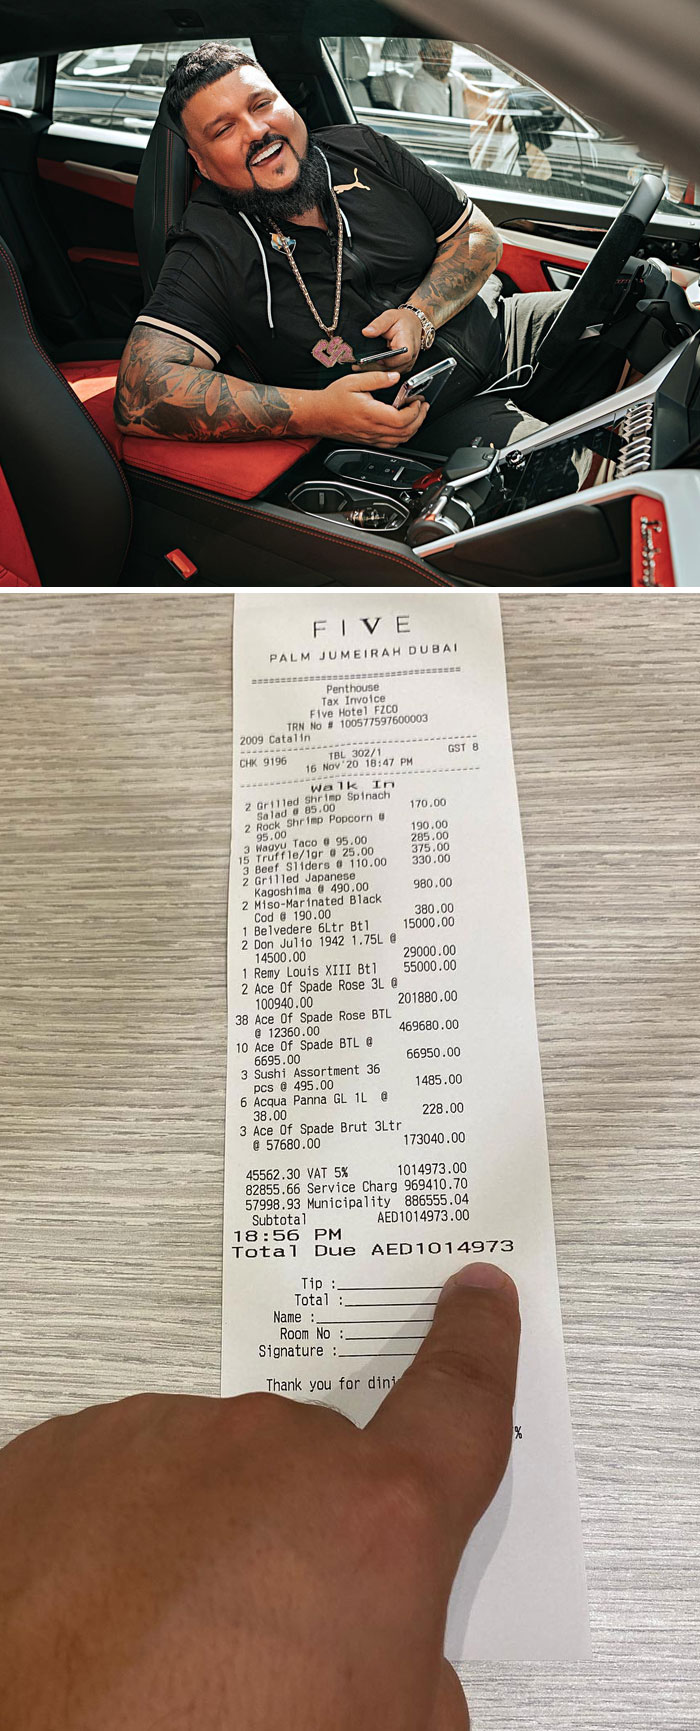 Radio DJ Charlie Sloth Spent 1 Million AED At A Dubai Bar And Shared A Copy Of His Lavish Bill On Instagram